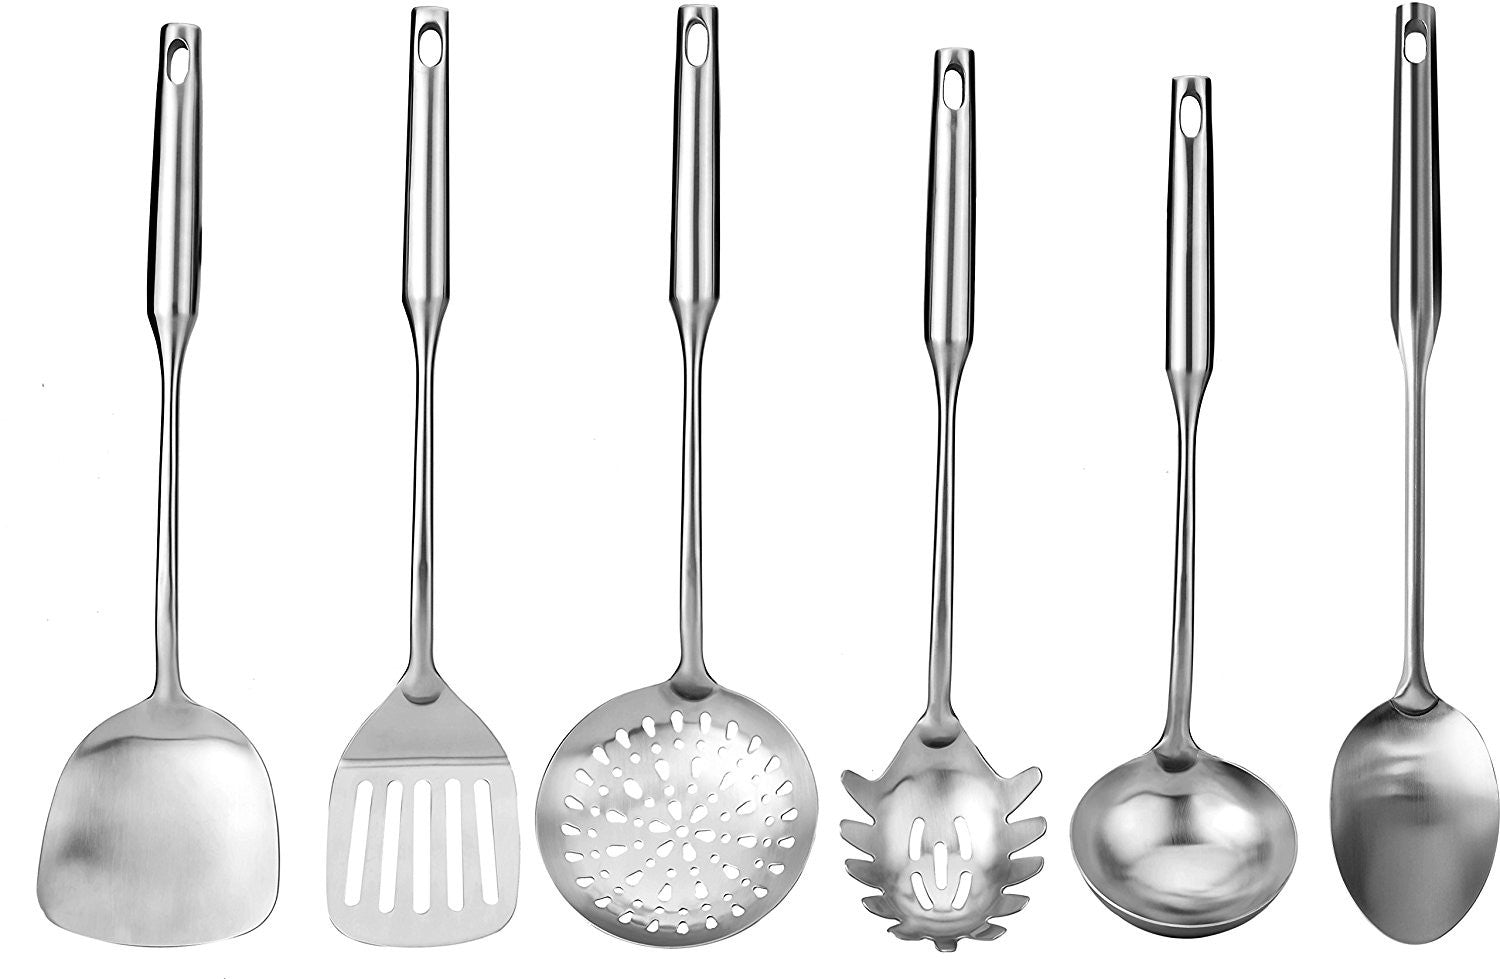 SS Steel Serving Tools for Kitchen Serving Spoons Set of 6 Different Pcs US